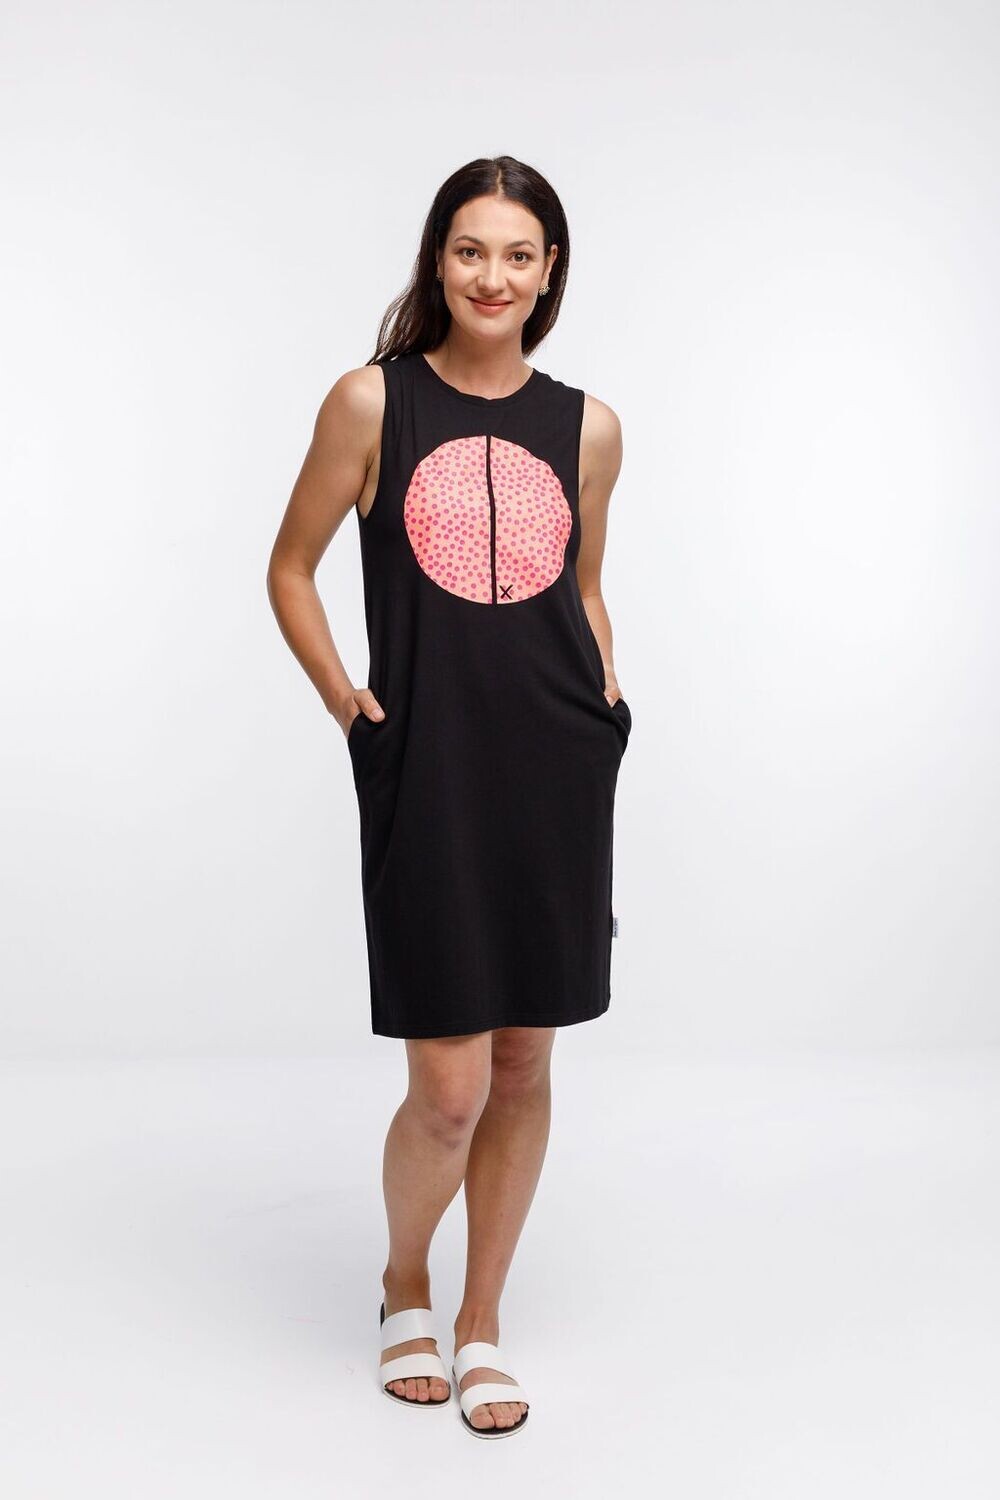 Home-lee Taylor singlet dress- black with Pink Yarrow spot